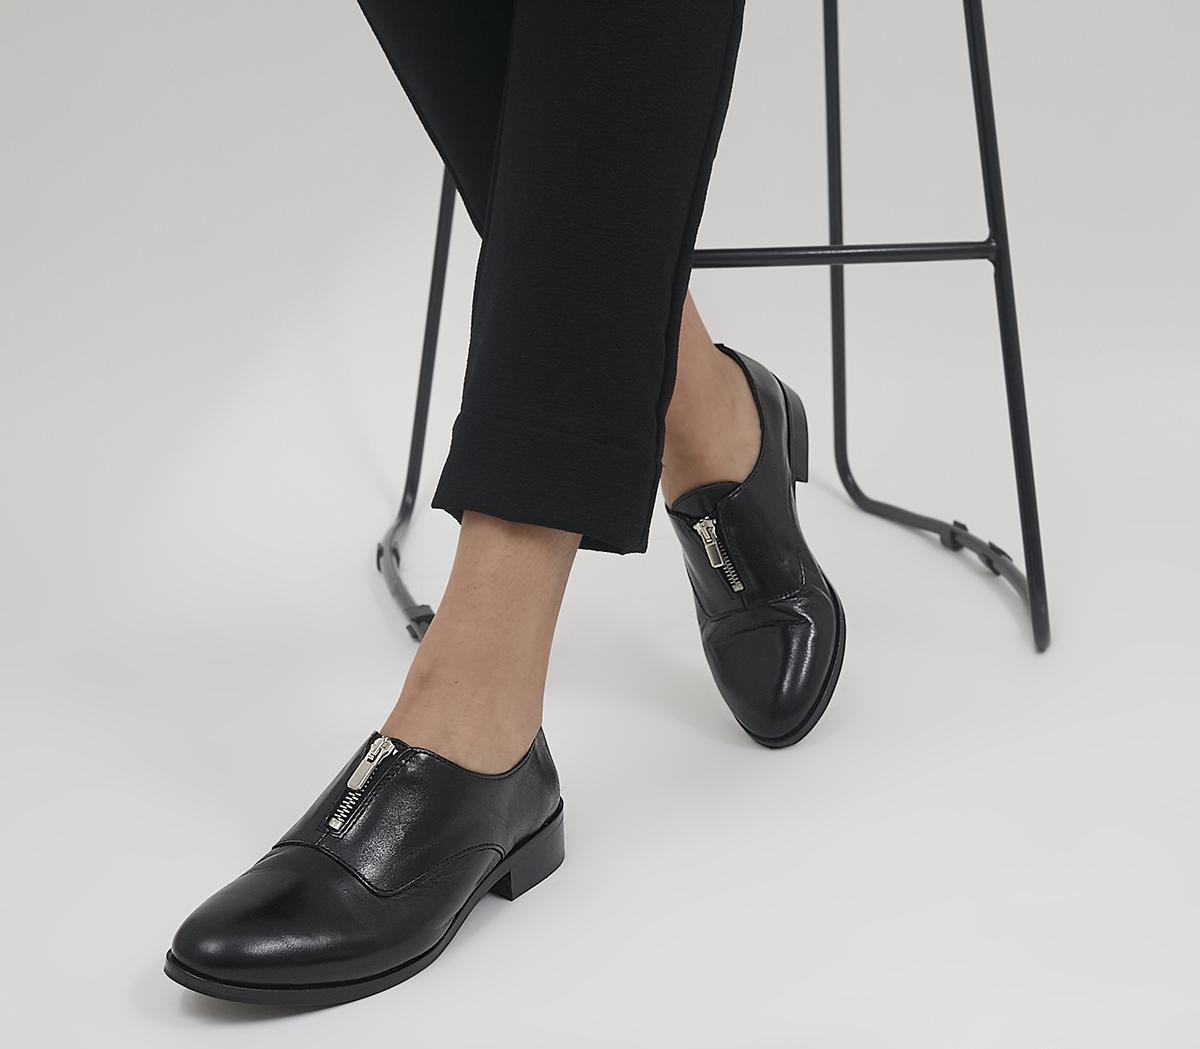 OFFICE Farly Front Zip Slip On Flats Black Leather - Flat Shoes for Women